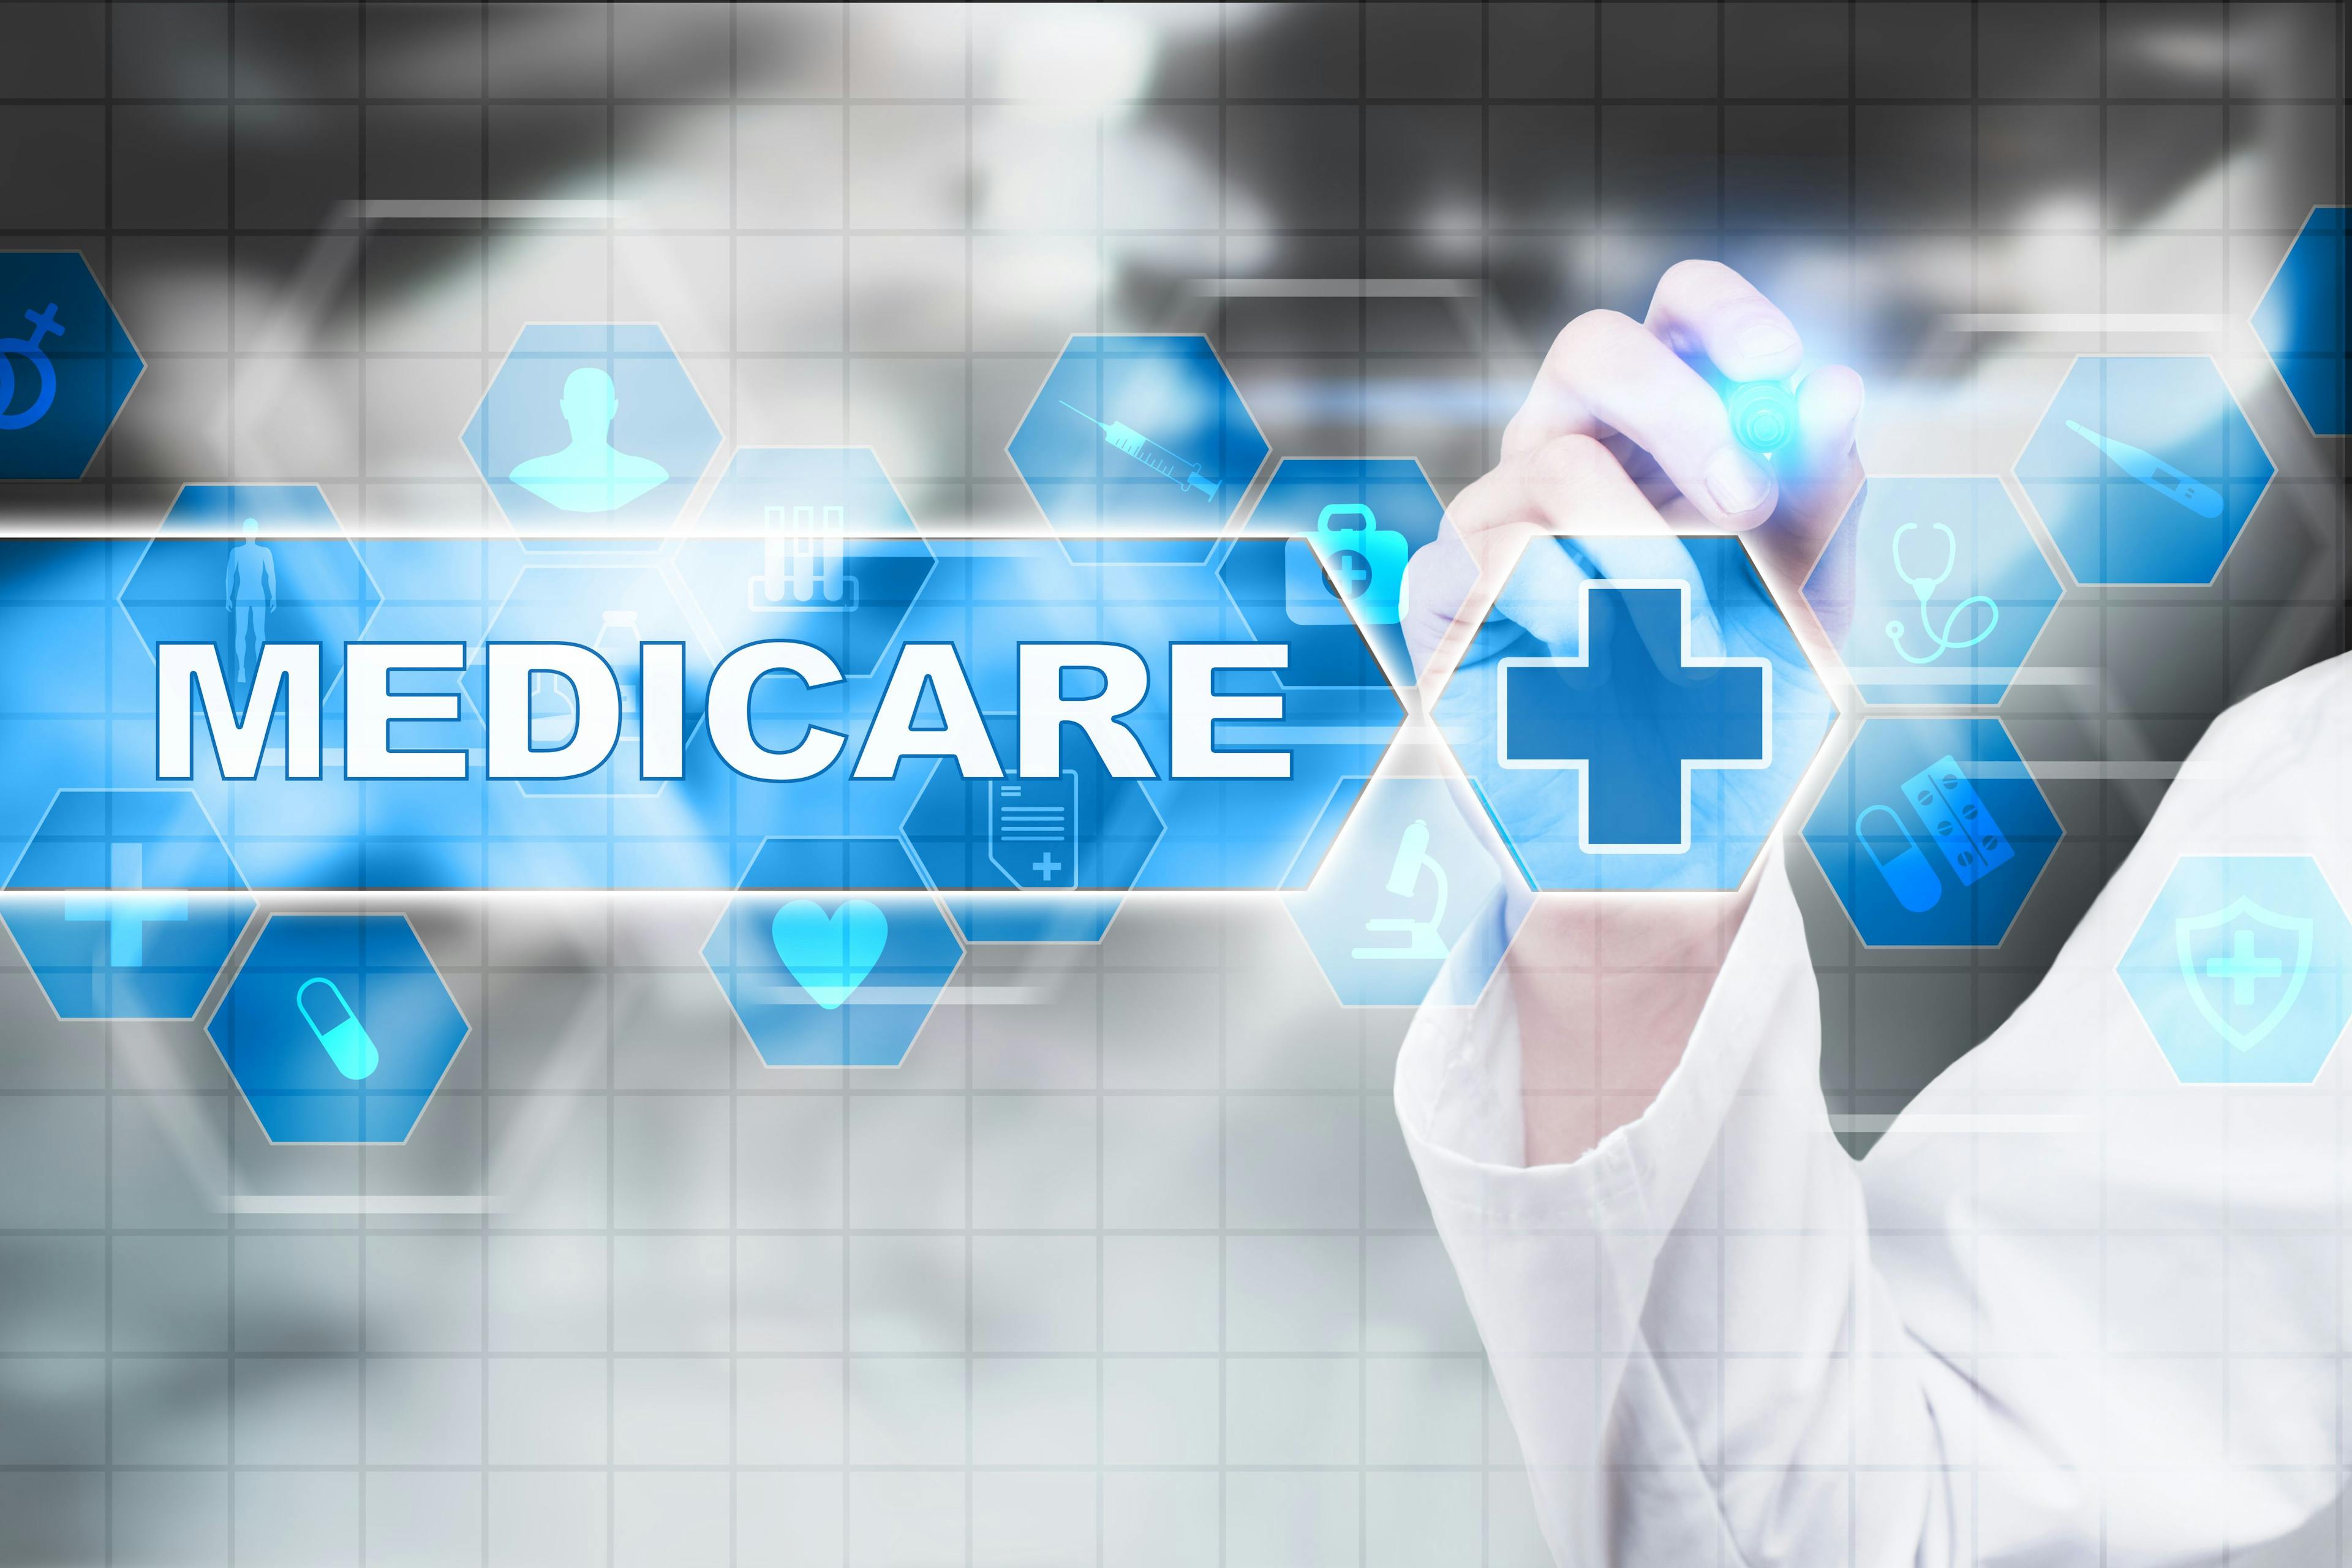 CMS proposing overhaul of Medicare accountable care organization rules